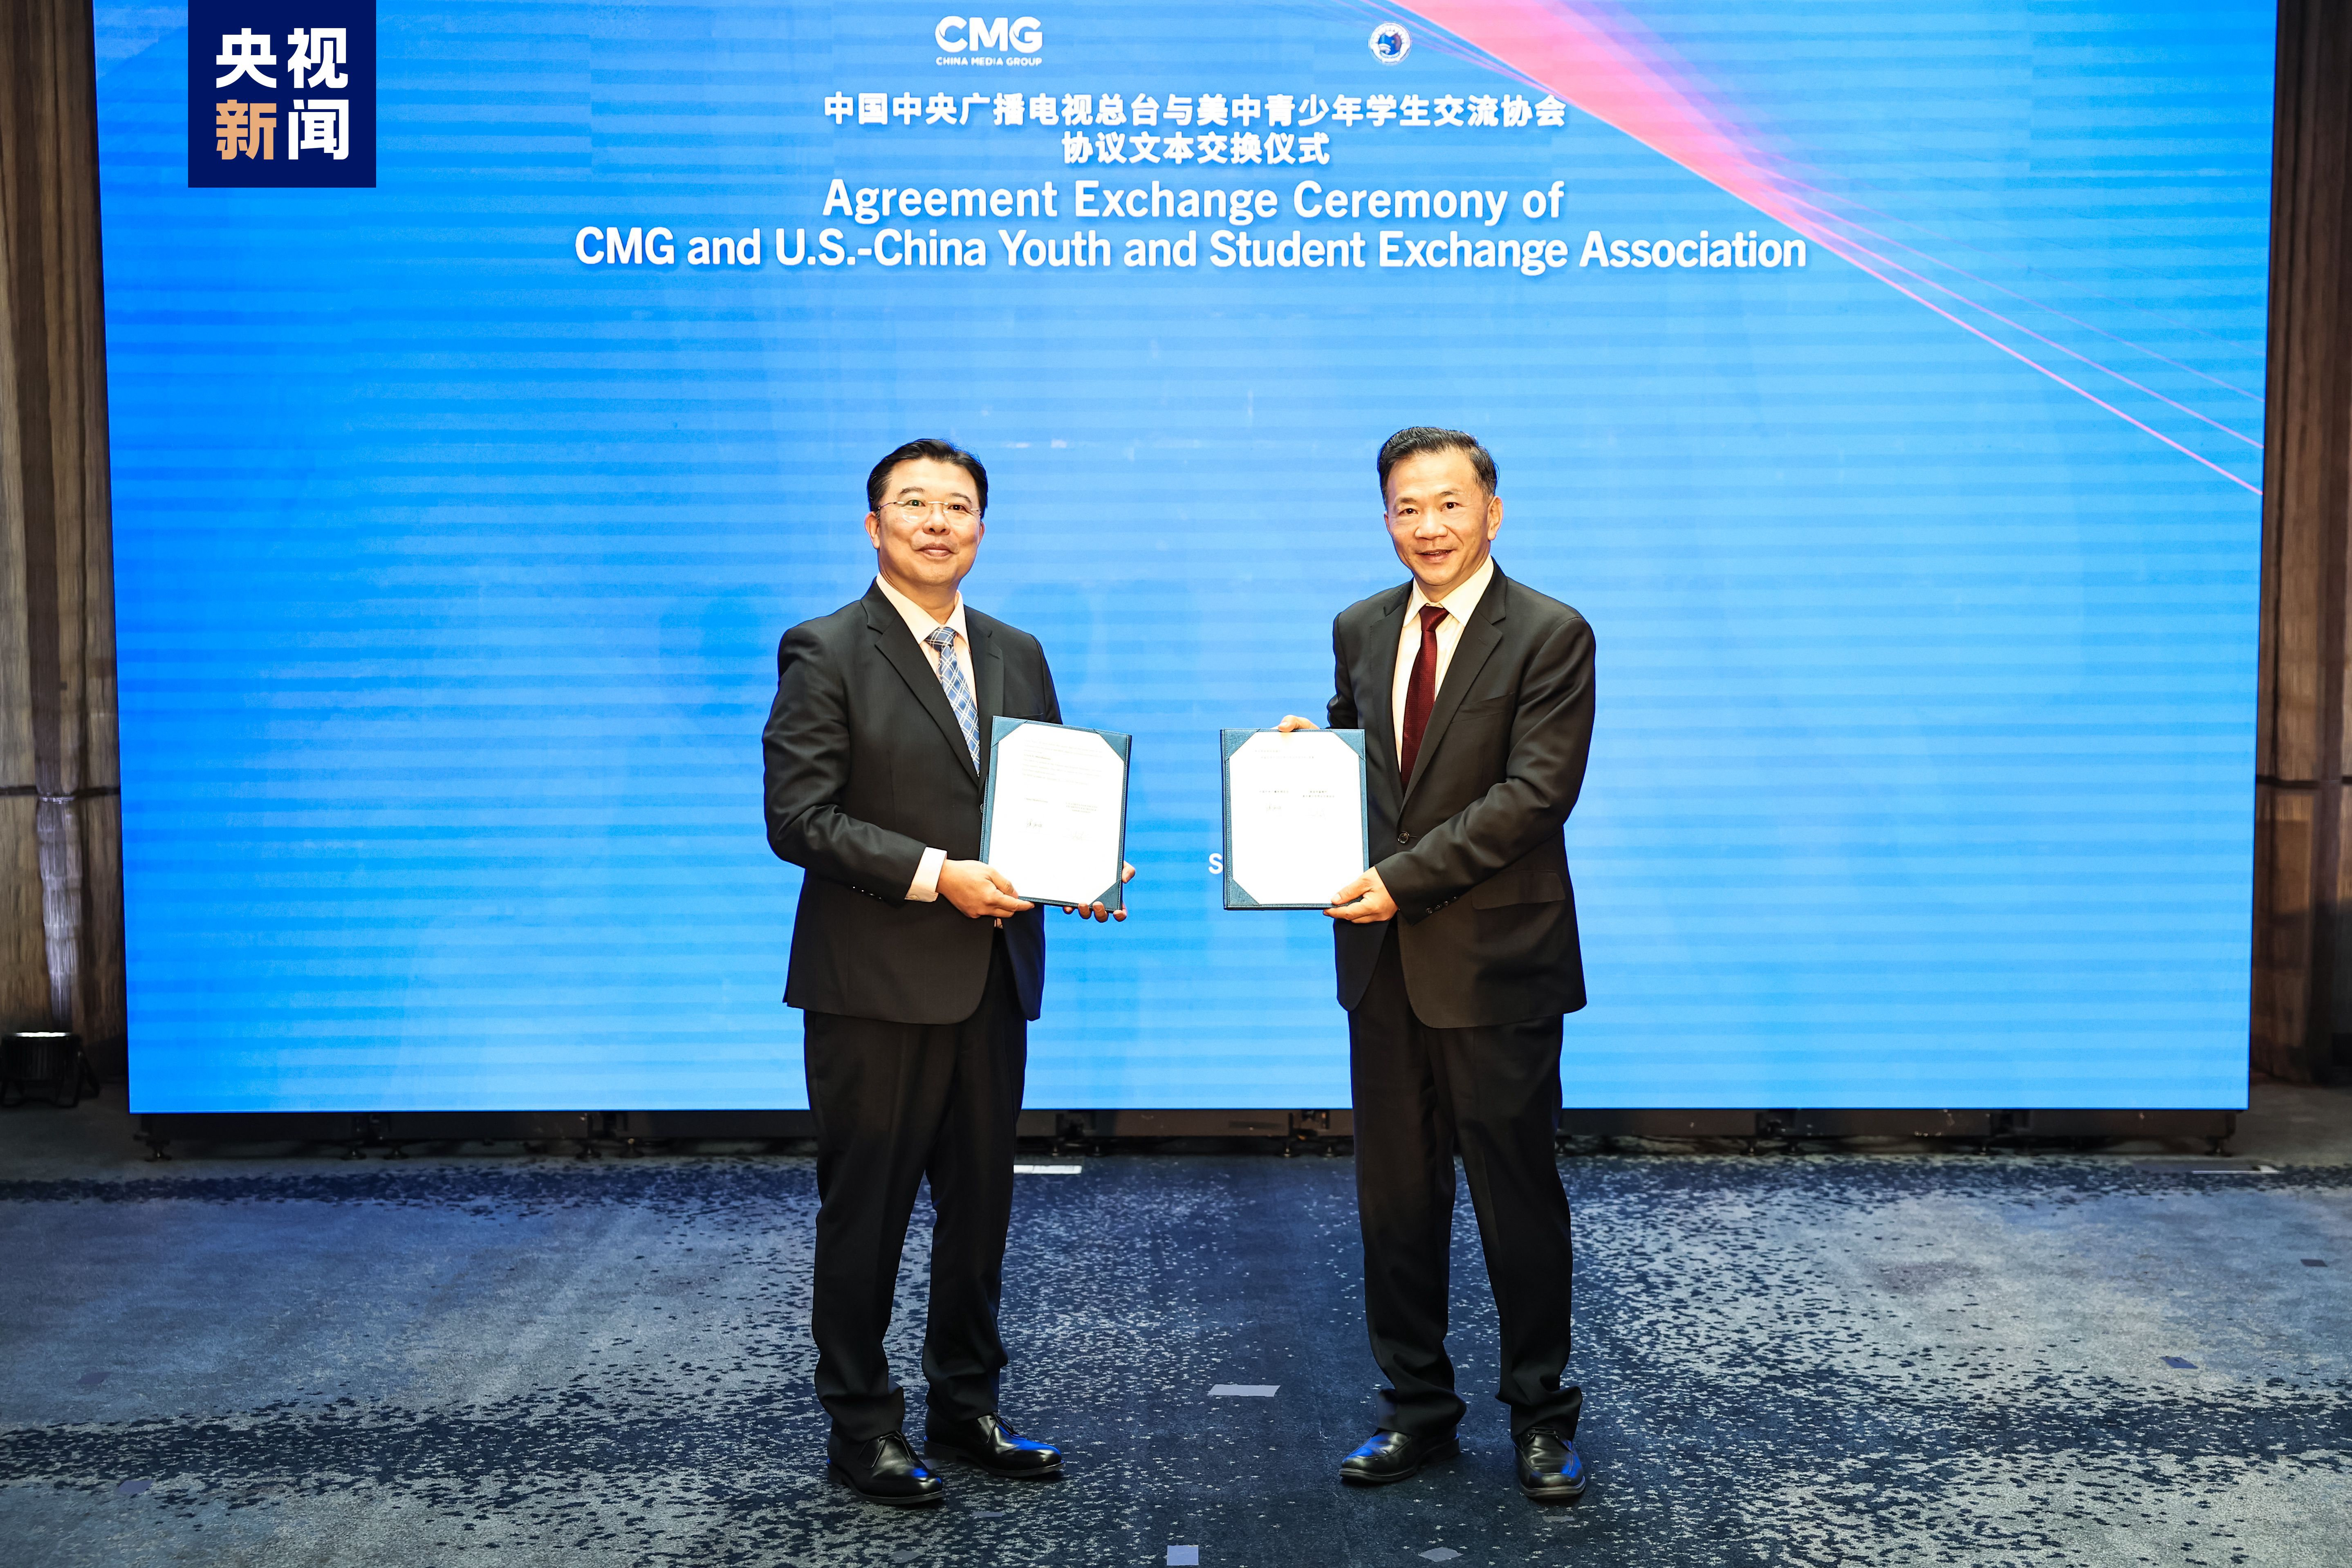 CMG exchanged agreements with the U.S.-China Youth and Student Exchange Association at the event. /CMG